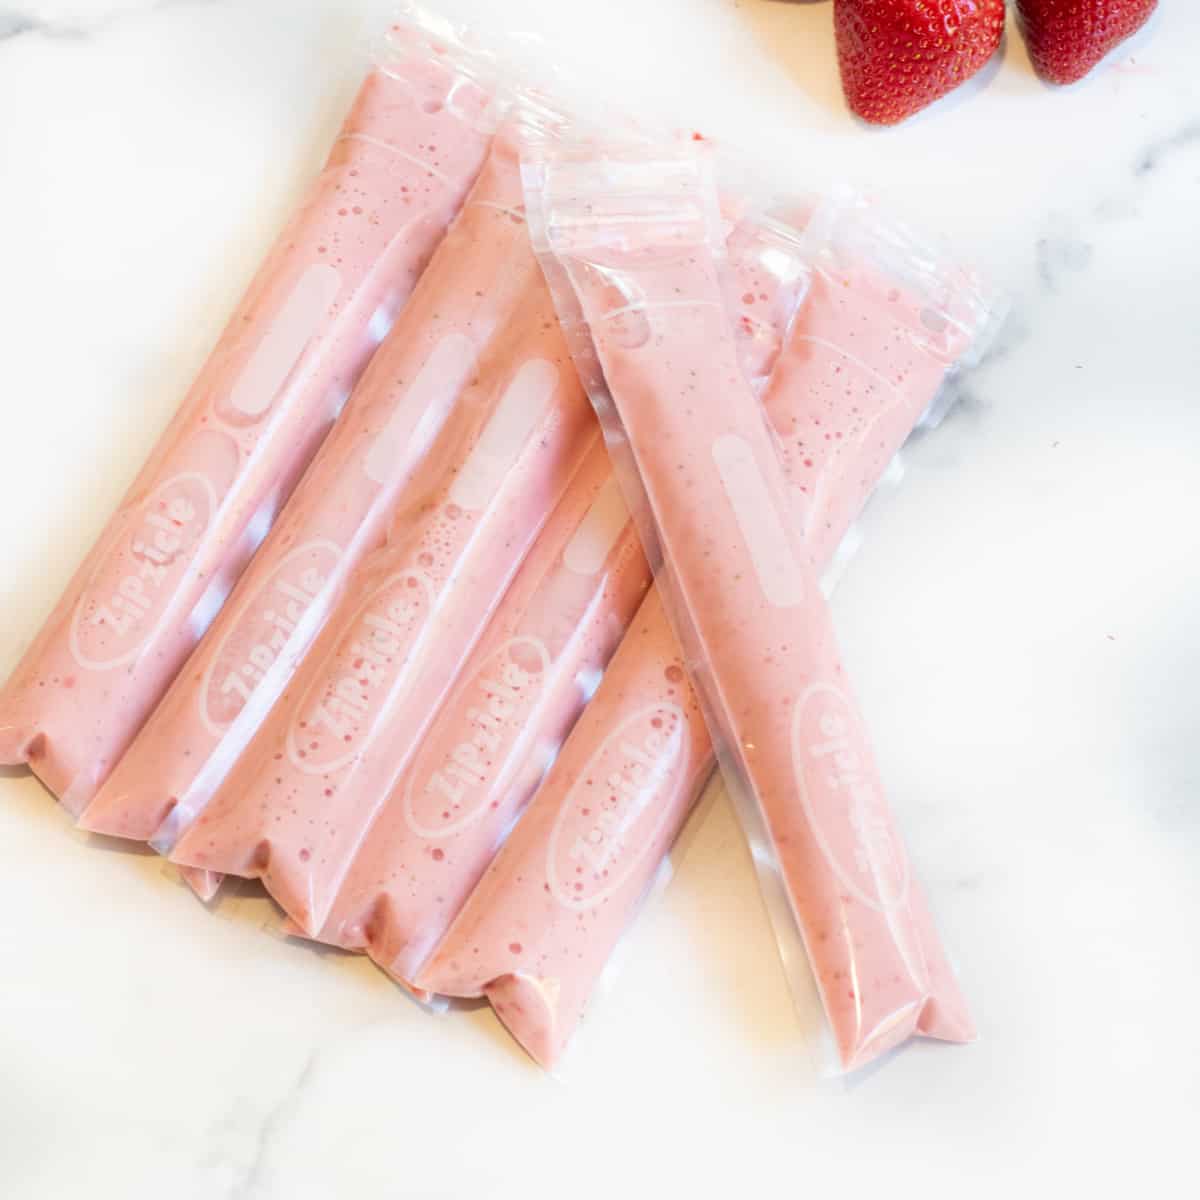 a stack of strawberry gogurts.